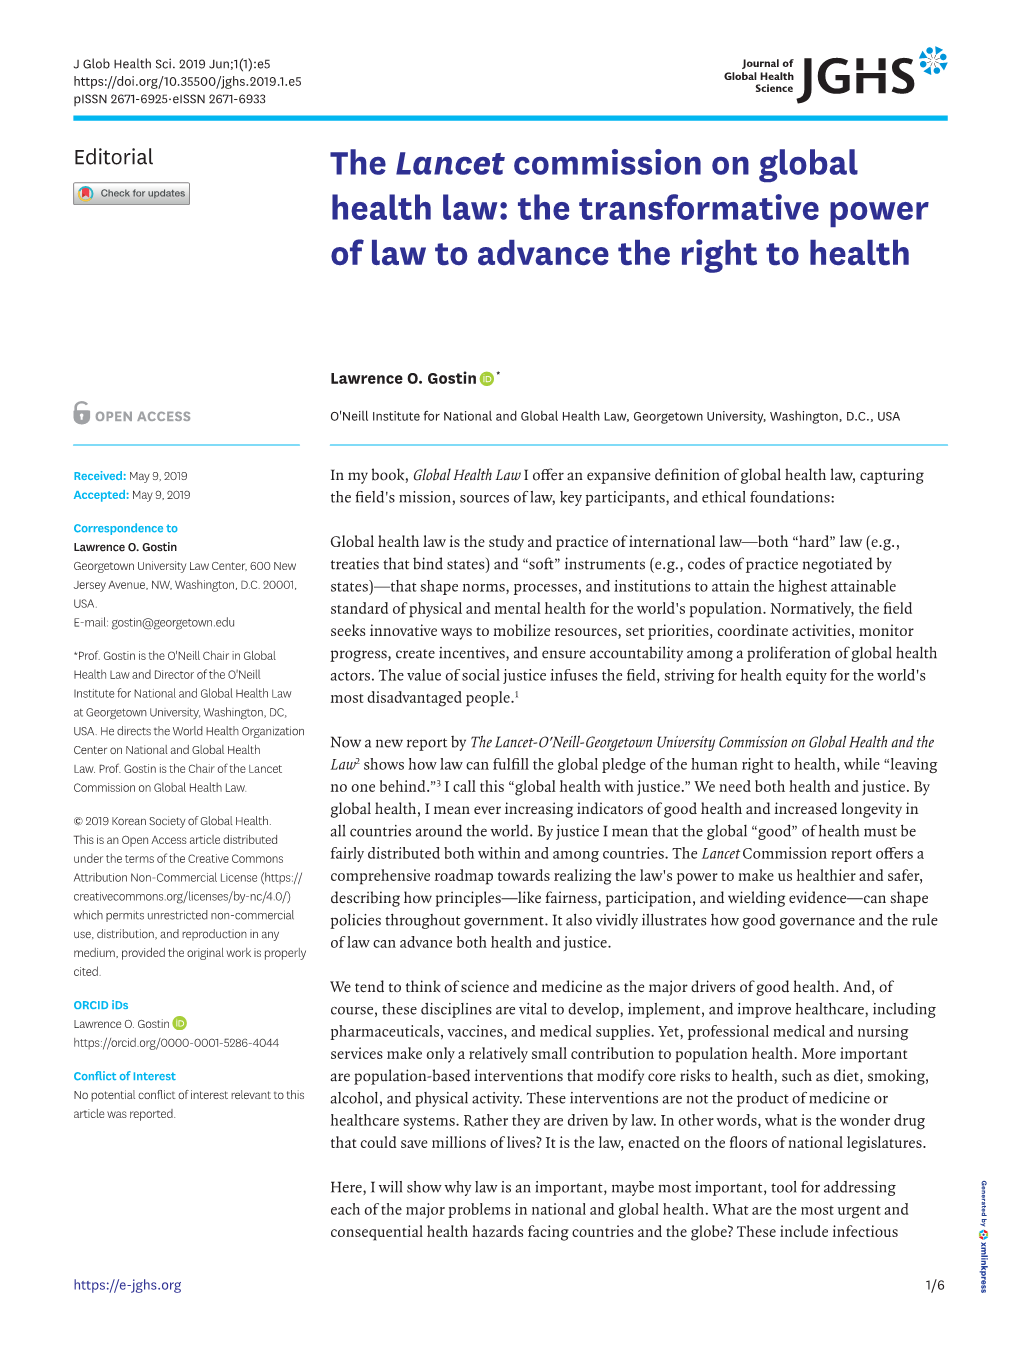 The Transformative Power of Law to Advance the Right to Health